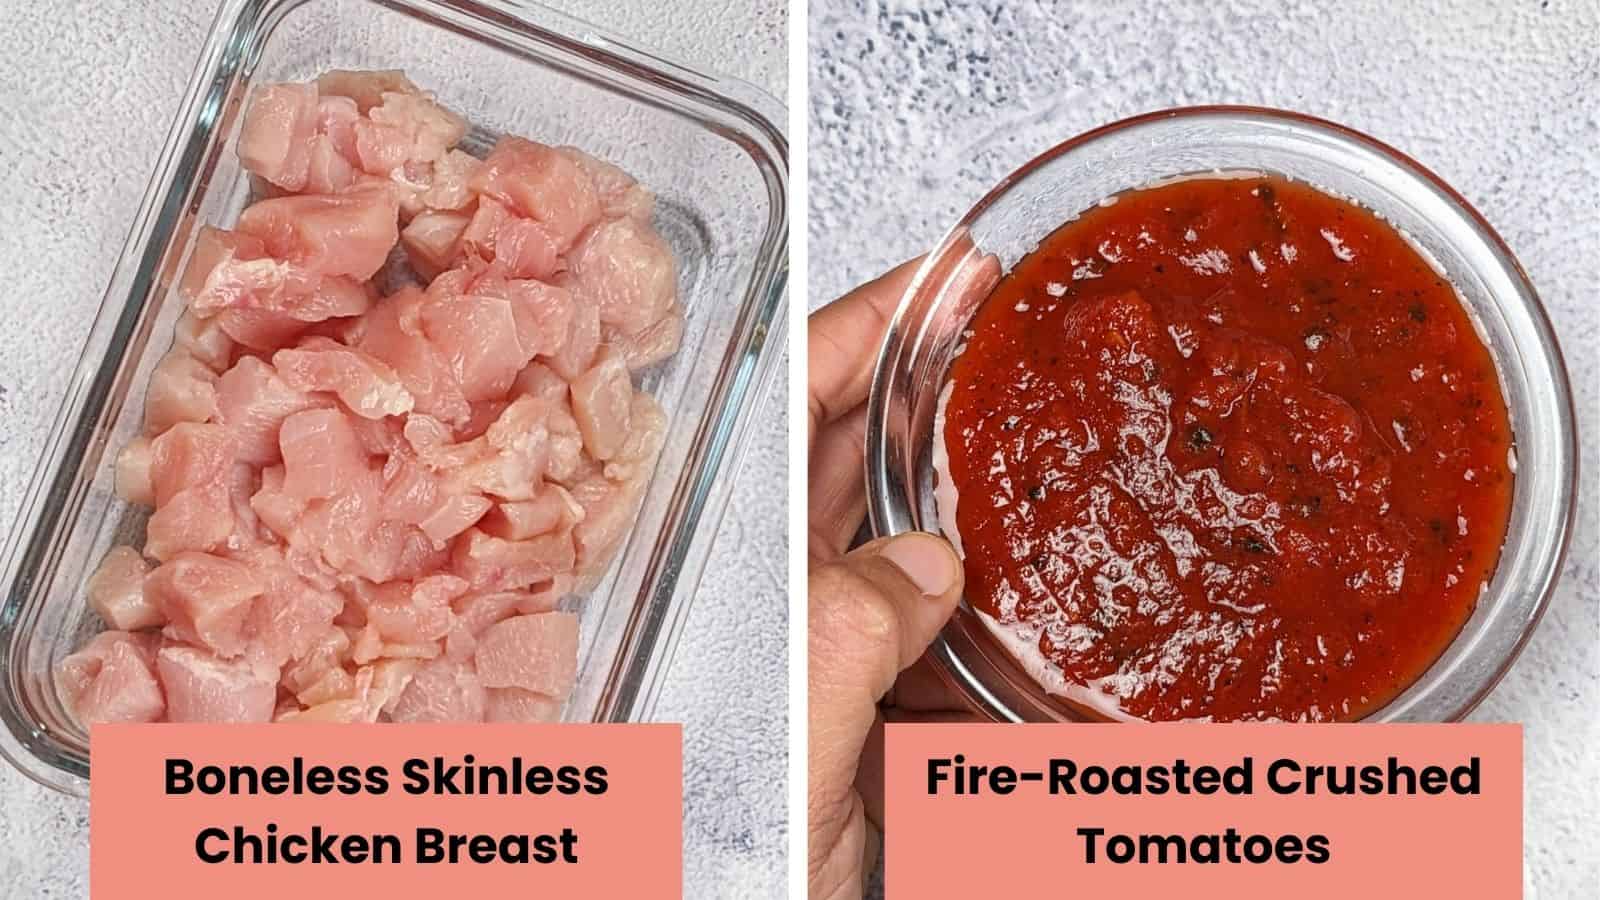 Air Fryer Butternut Squash Spiced Chickpeas Chicken Soup ingredients in containers: diced chicken breast in a glass rectangular container (left side) and glass bowl of crushed fire-roasted tomatoes (right side)